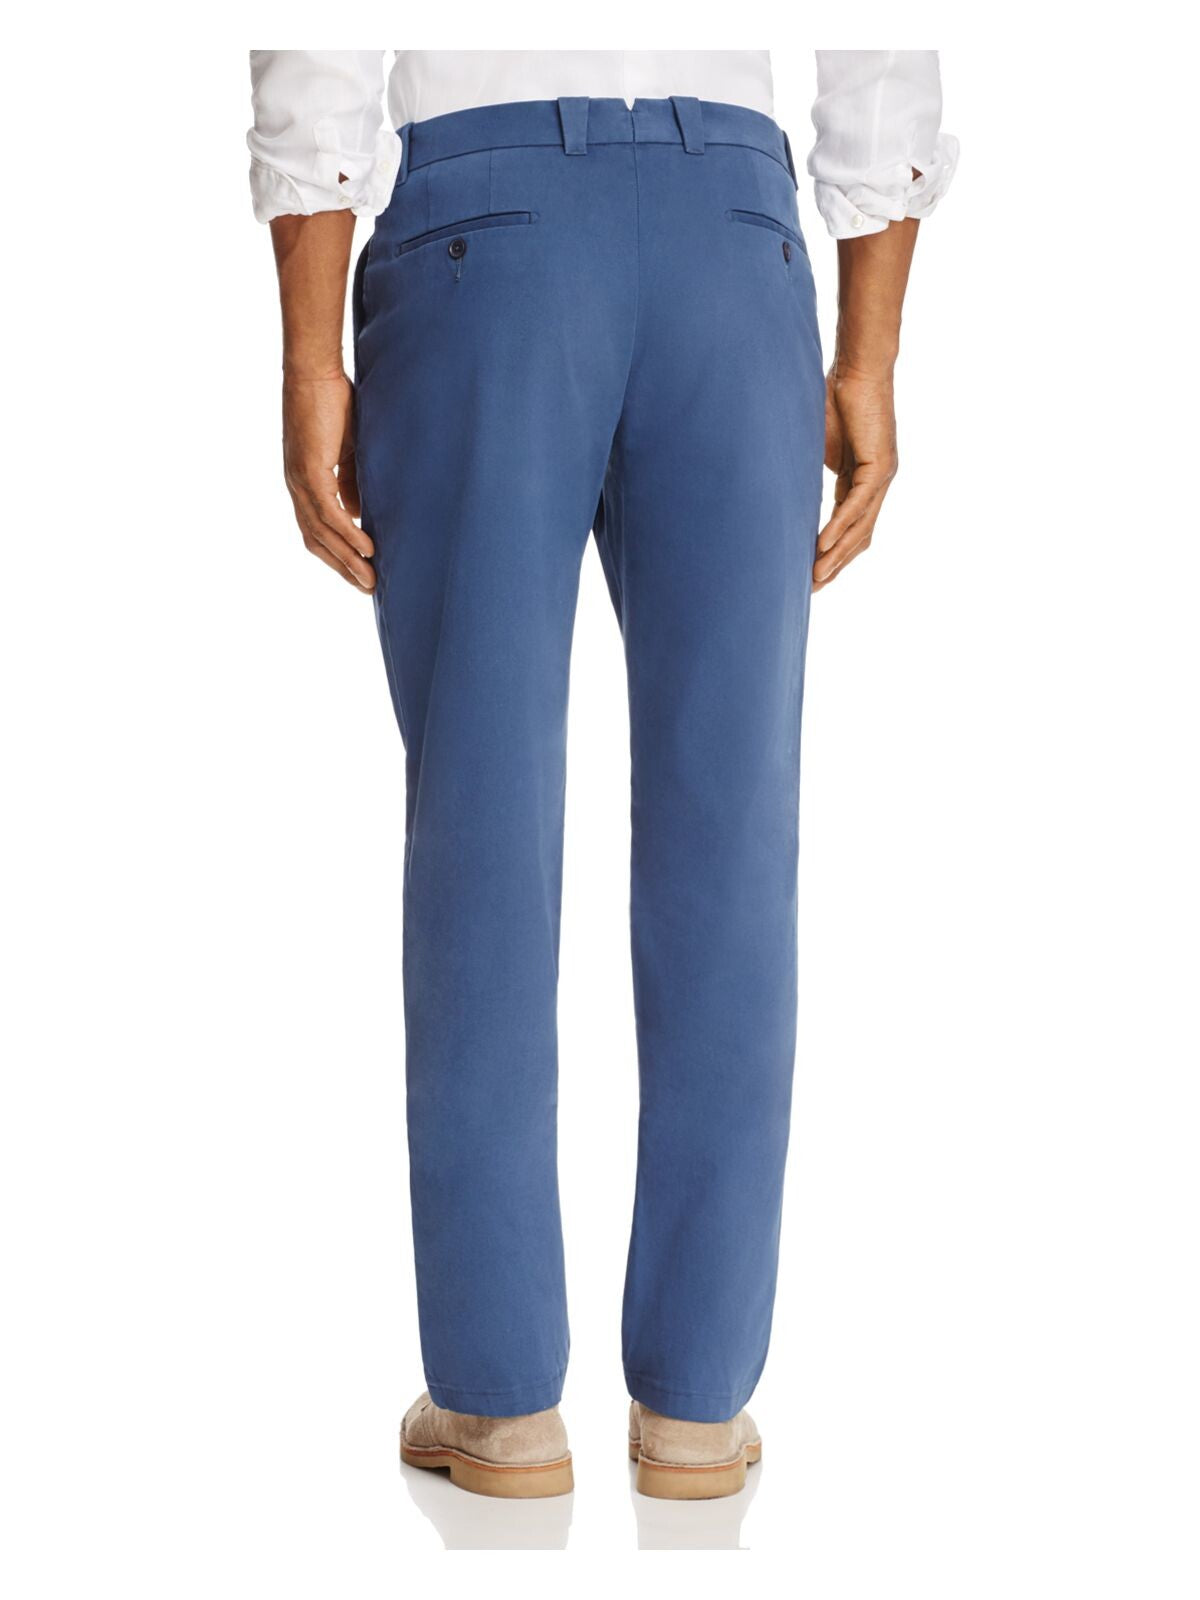 The Mens store Mens Blue Classic Fit Chino Pants 34W X 34L